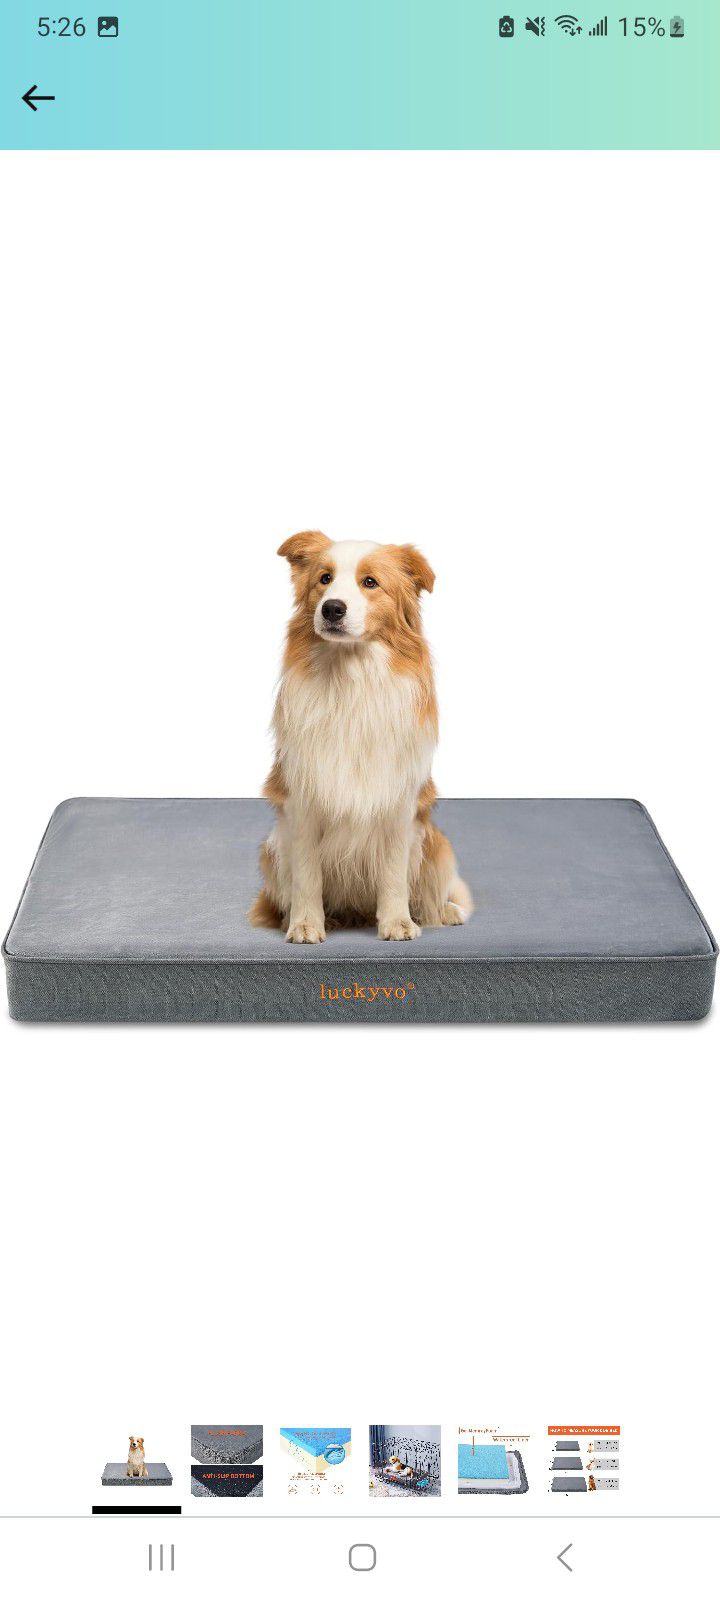 BRAND NEW LARGE SIZE DoG BED $15